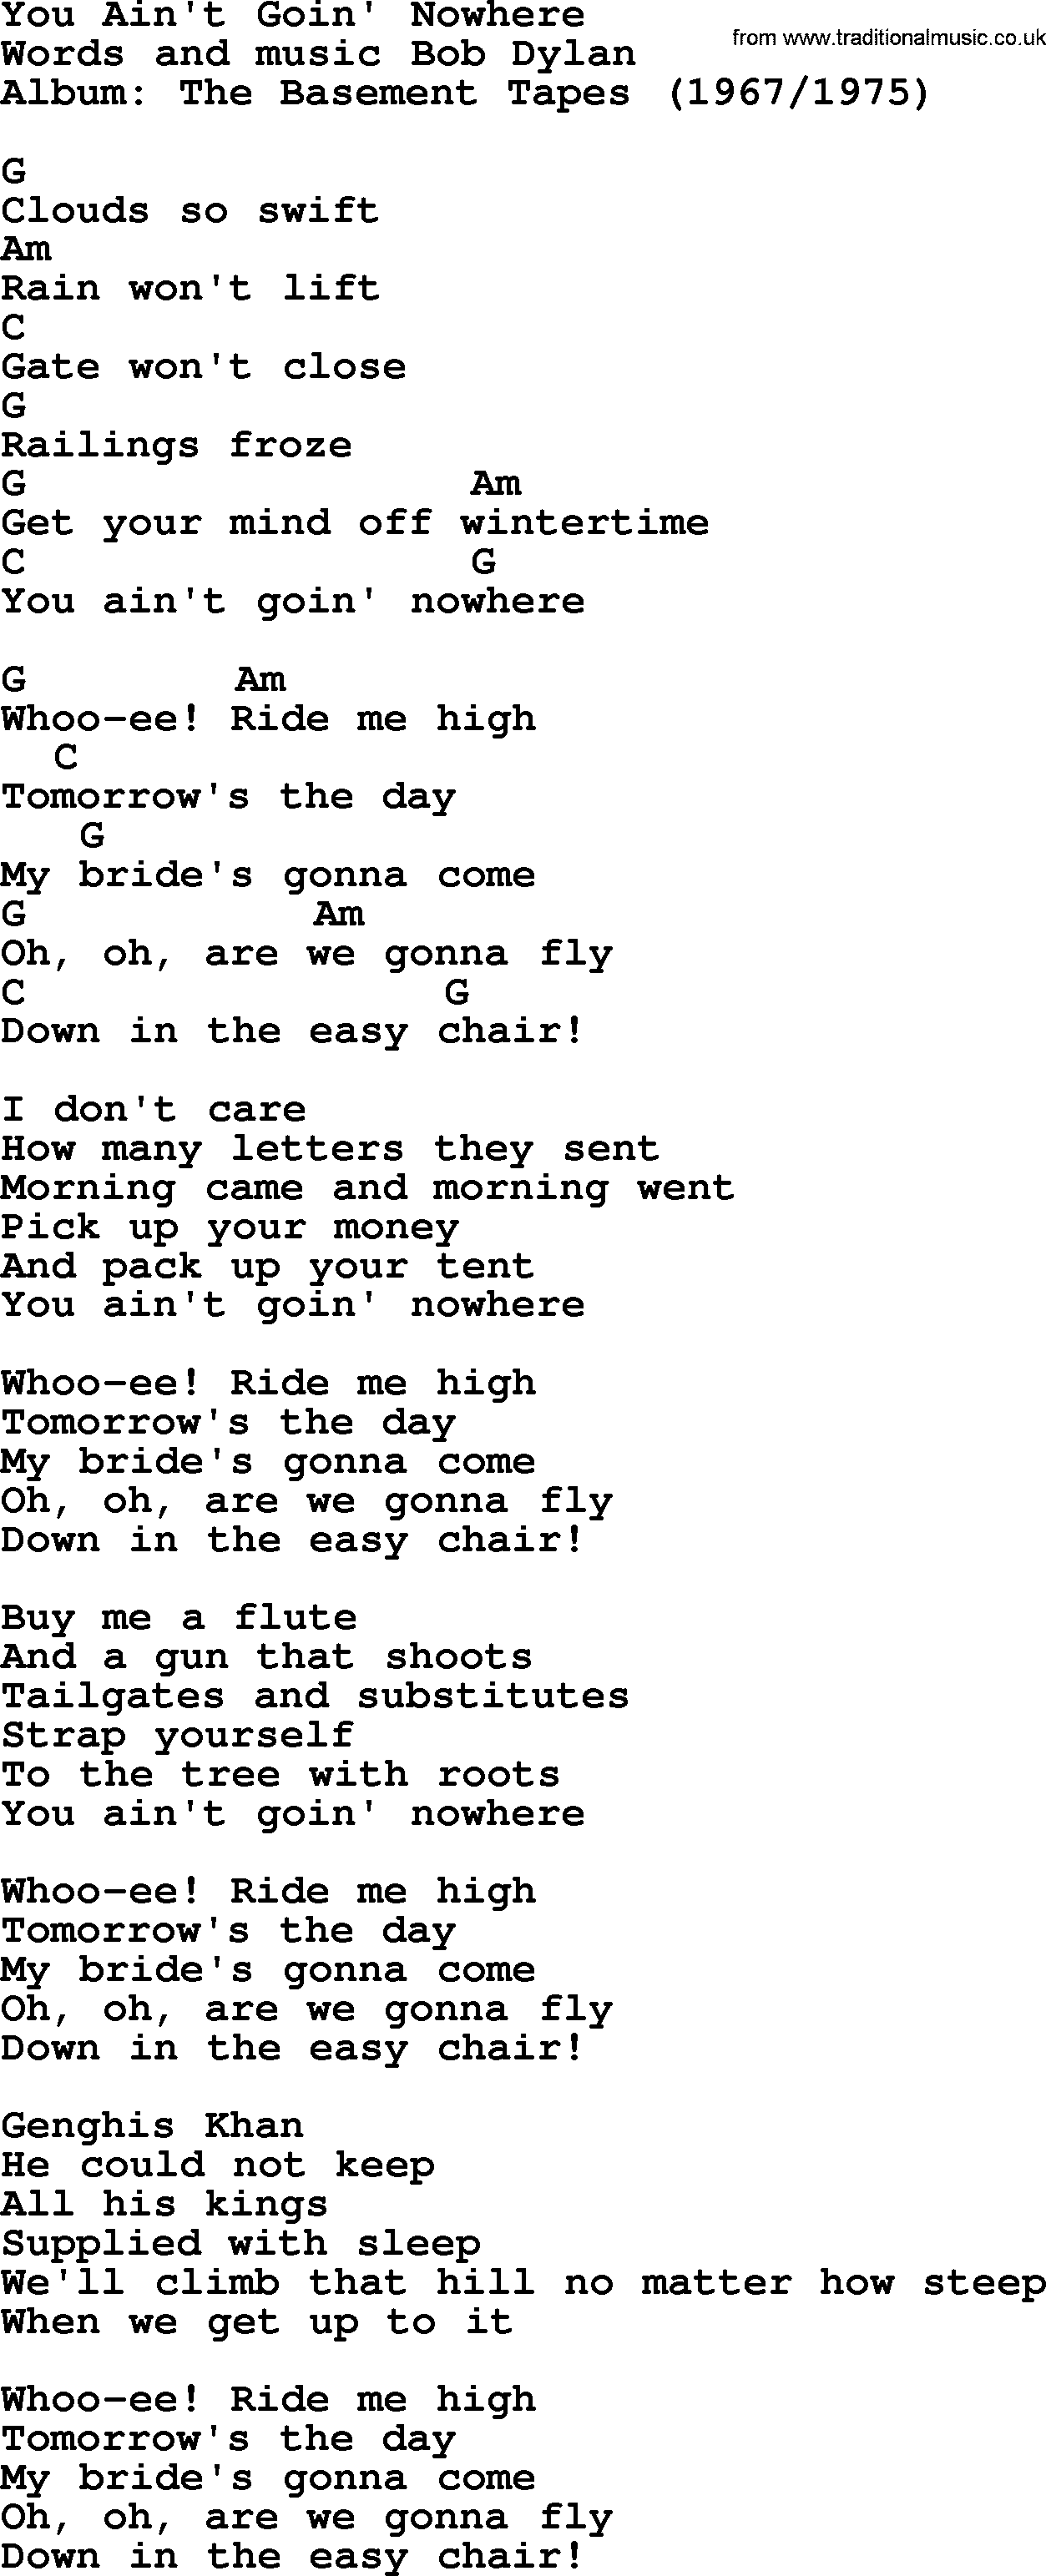 Bob Dylan song, lyrics with chords - You Ain't Goin' Nowhere